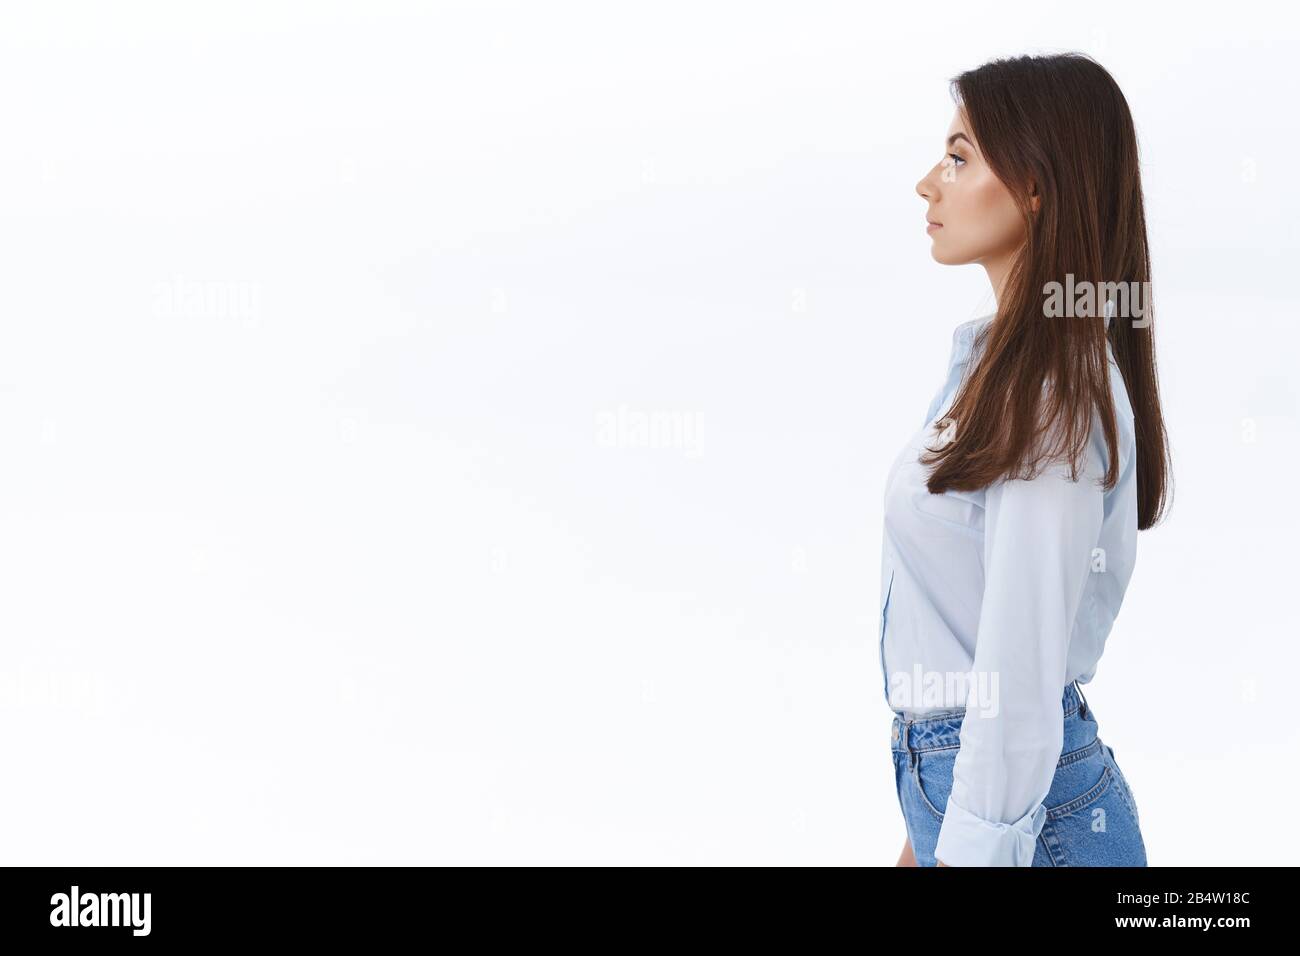 Profile portrait of skinny attractive brunette caucasian adult woman in blue shirt and jeans, standing straight and looking left at blank white space Stock Photo